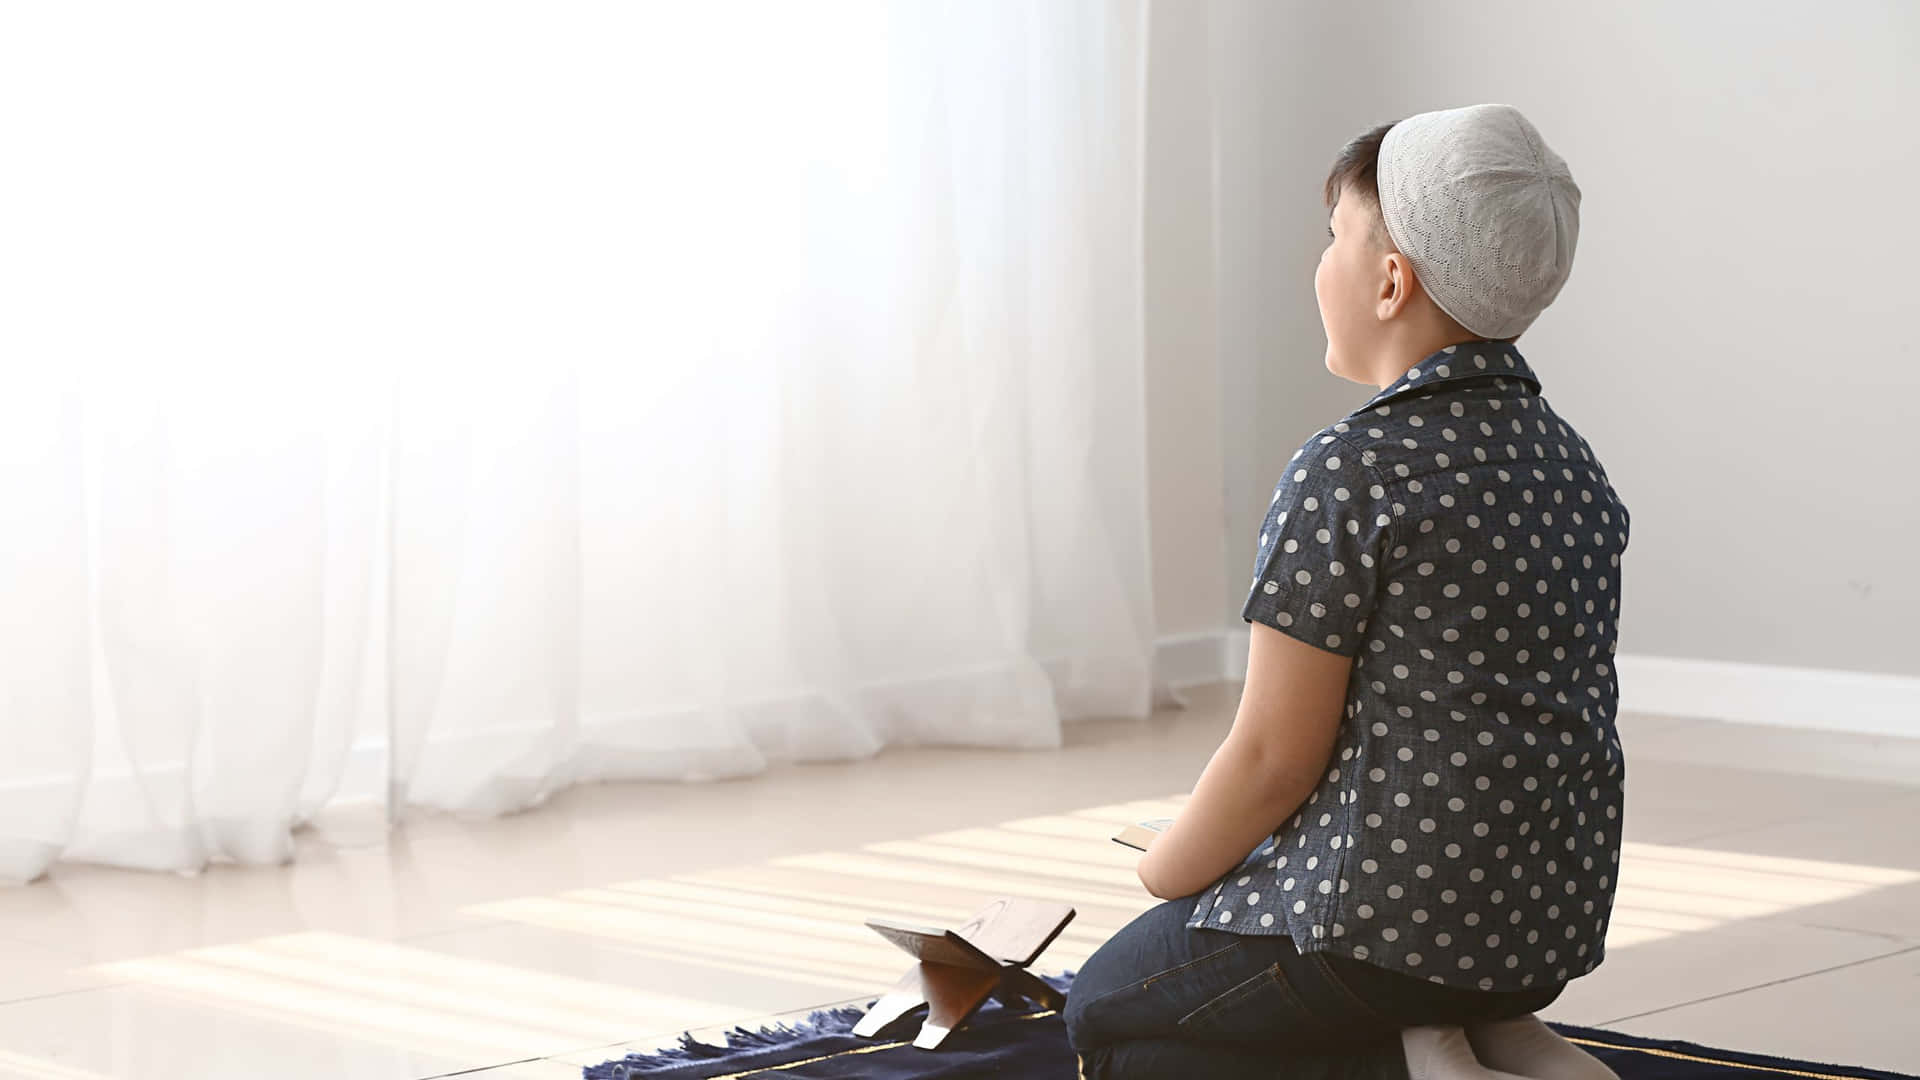 Böneutövandemuslimsk Pojke Prickig Tröja. (in The Context Of A Computer Or Mobile Wallpaper, This Could Be An Image Of A Young Muslim Boy Praying While Wearing A Polka Dot Polo Shirt.) Wallpaper